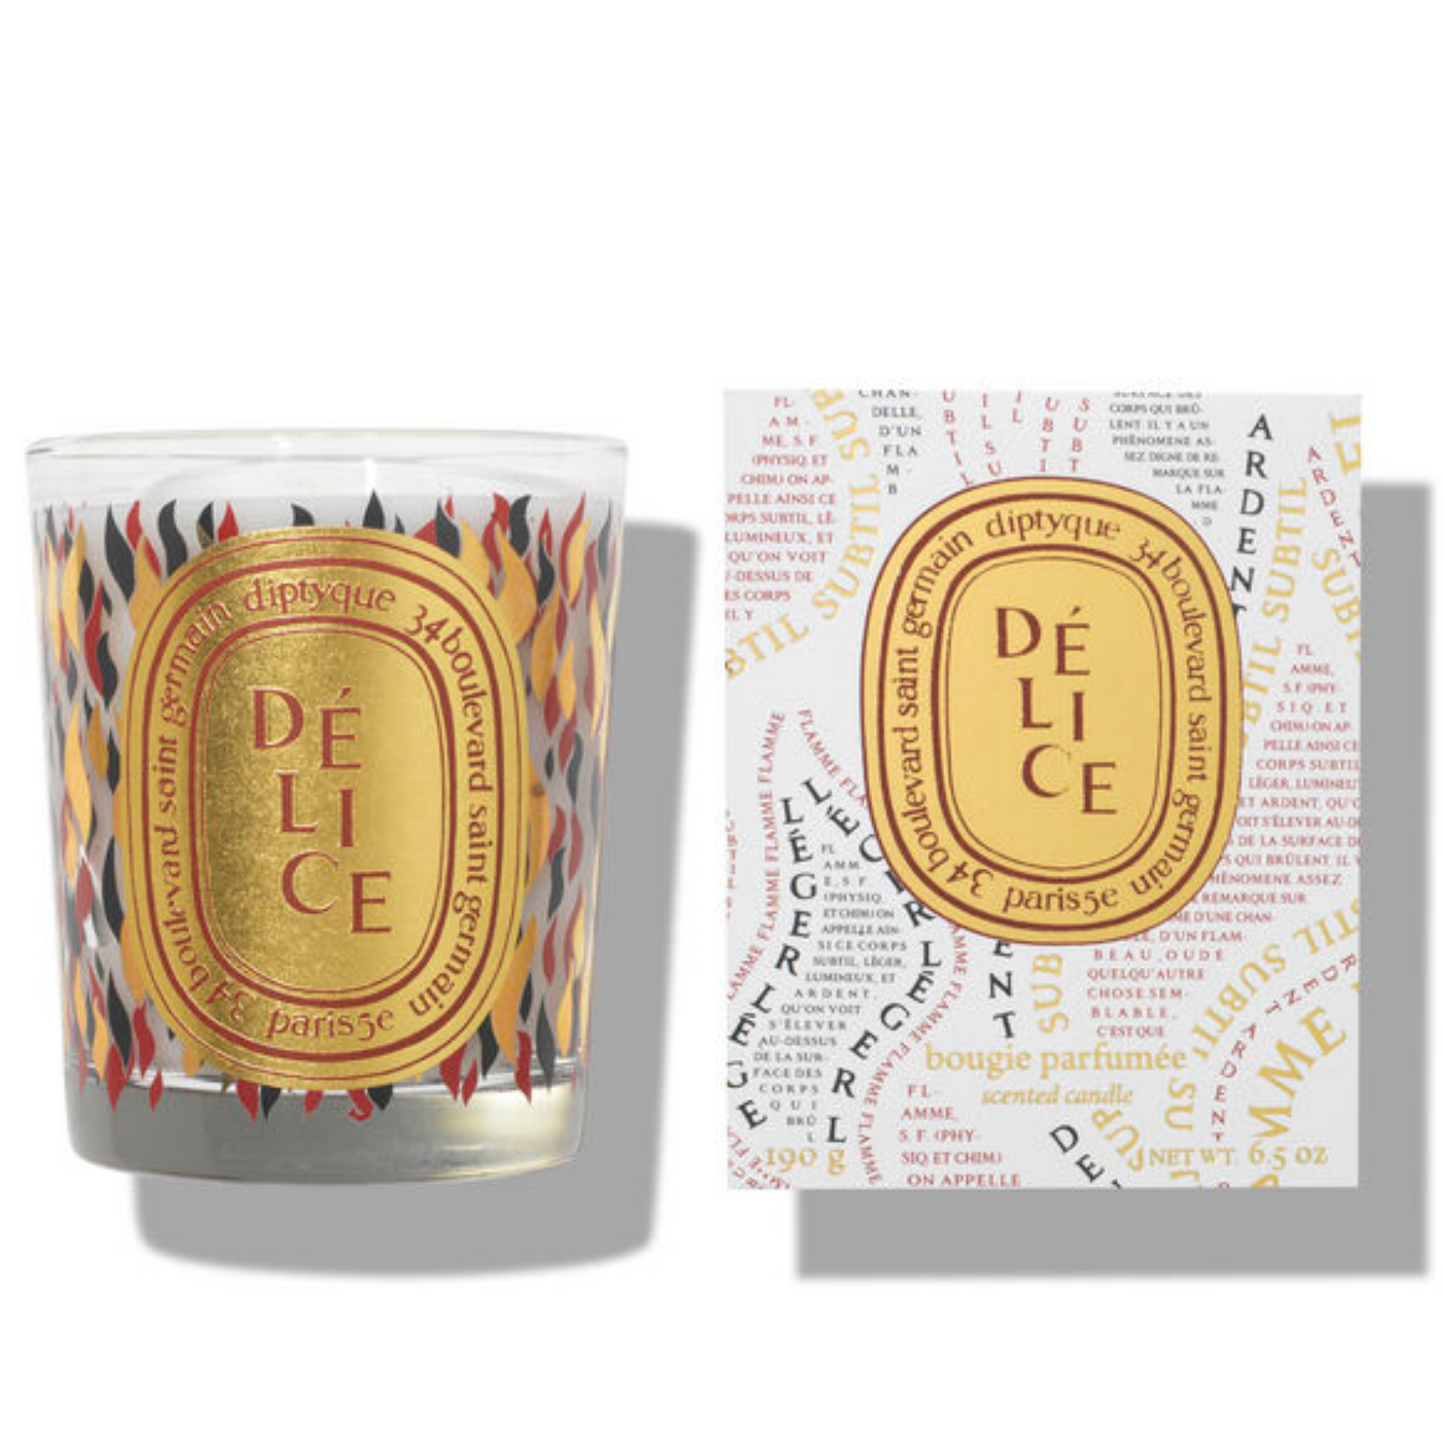 Primary Image of  Delight (Delice) Candle with Lid